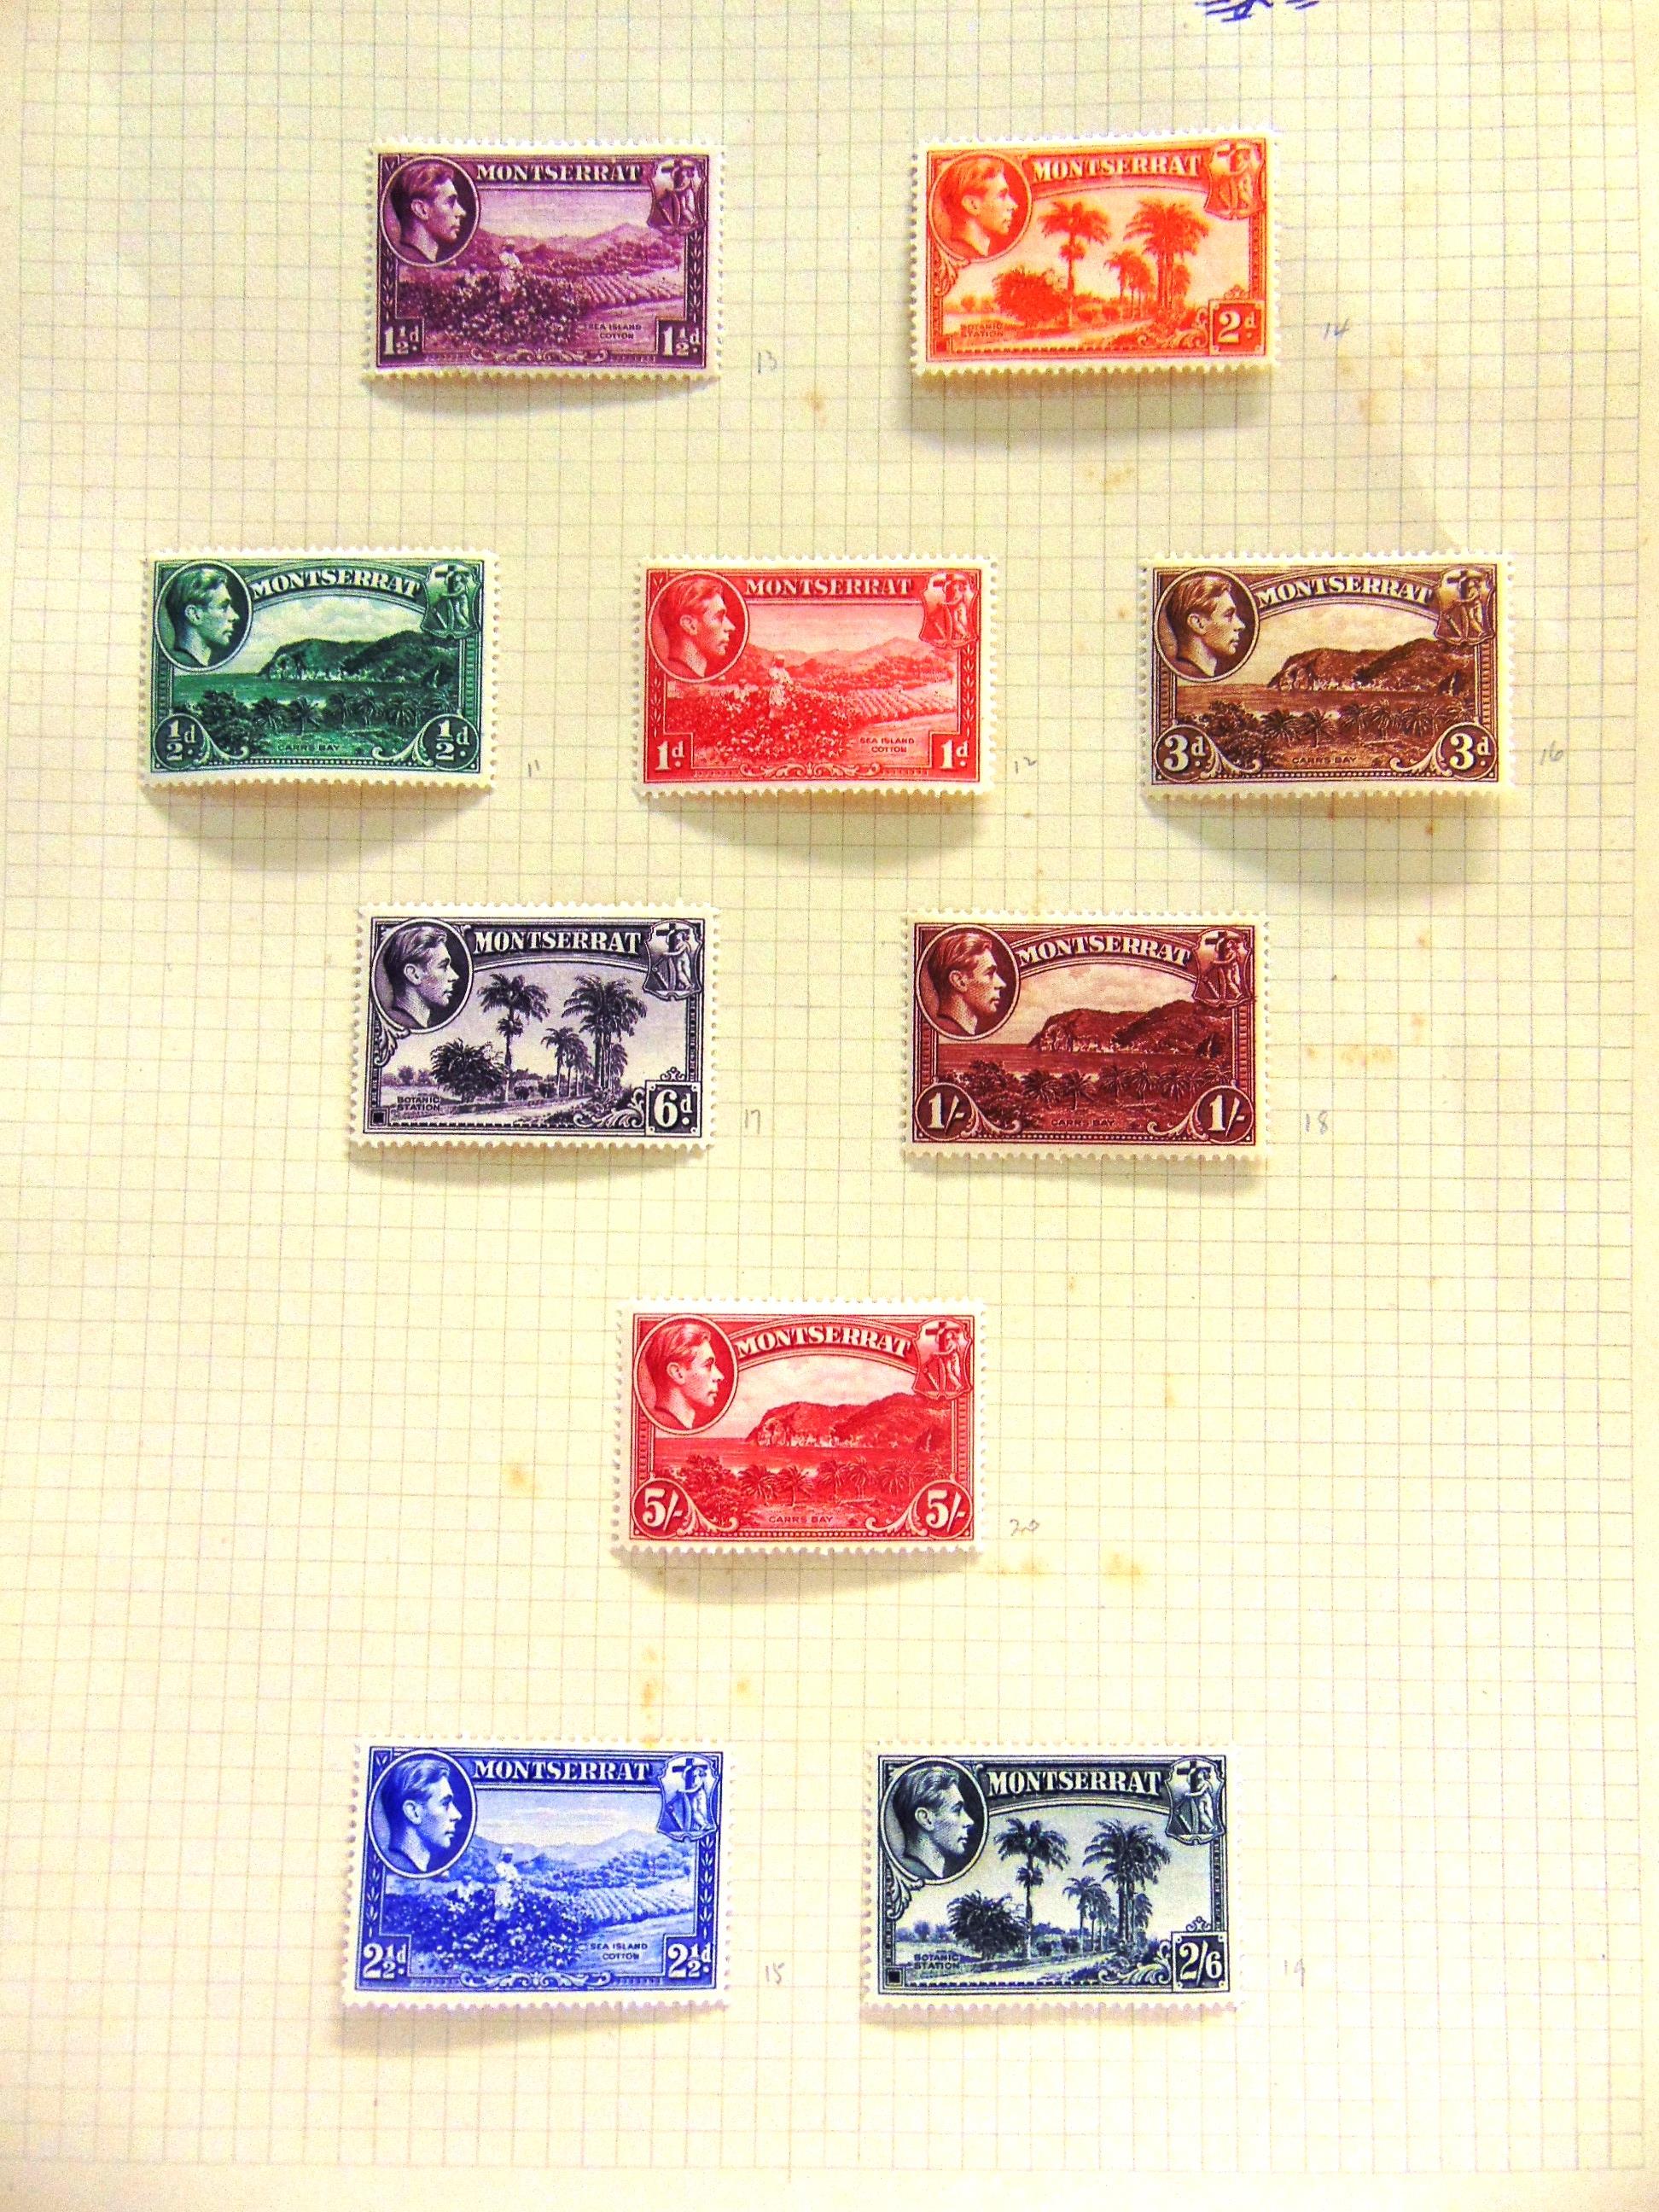 STAMPS - A PART-WORLD COLLECTION including Great Britain and British Commonwealth, mint and used (